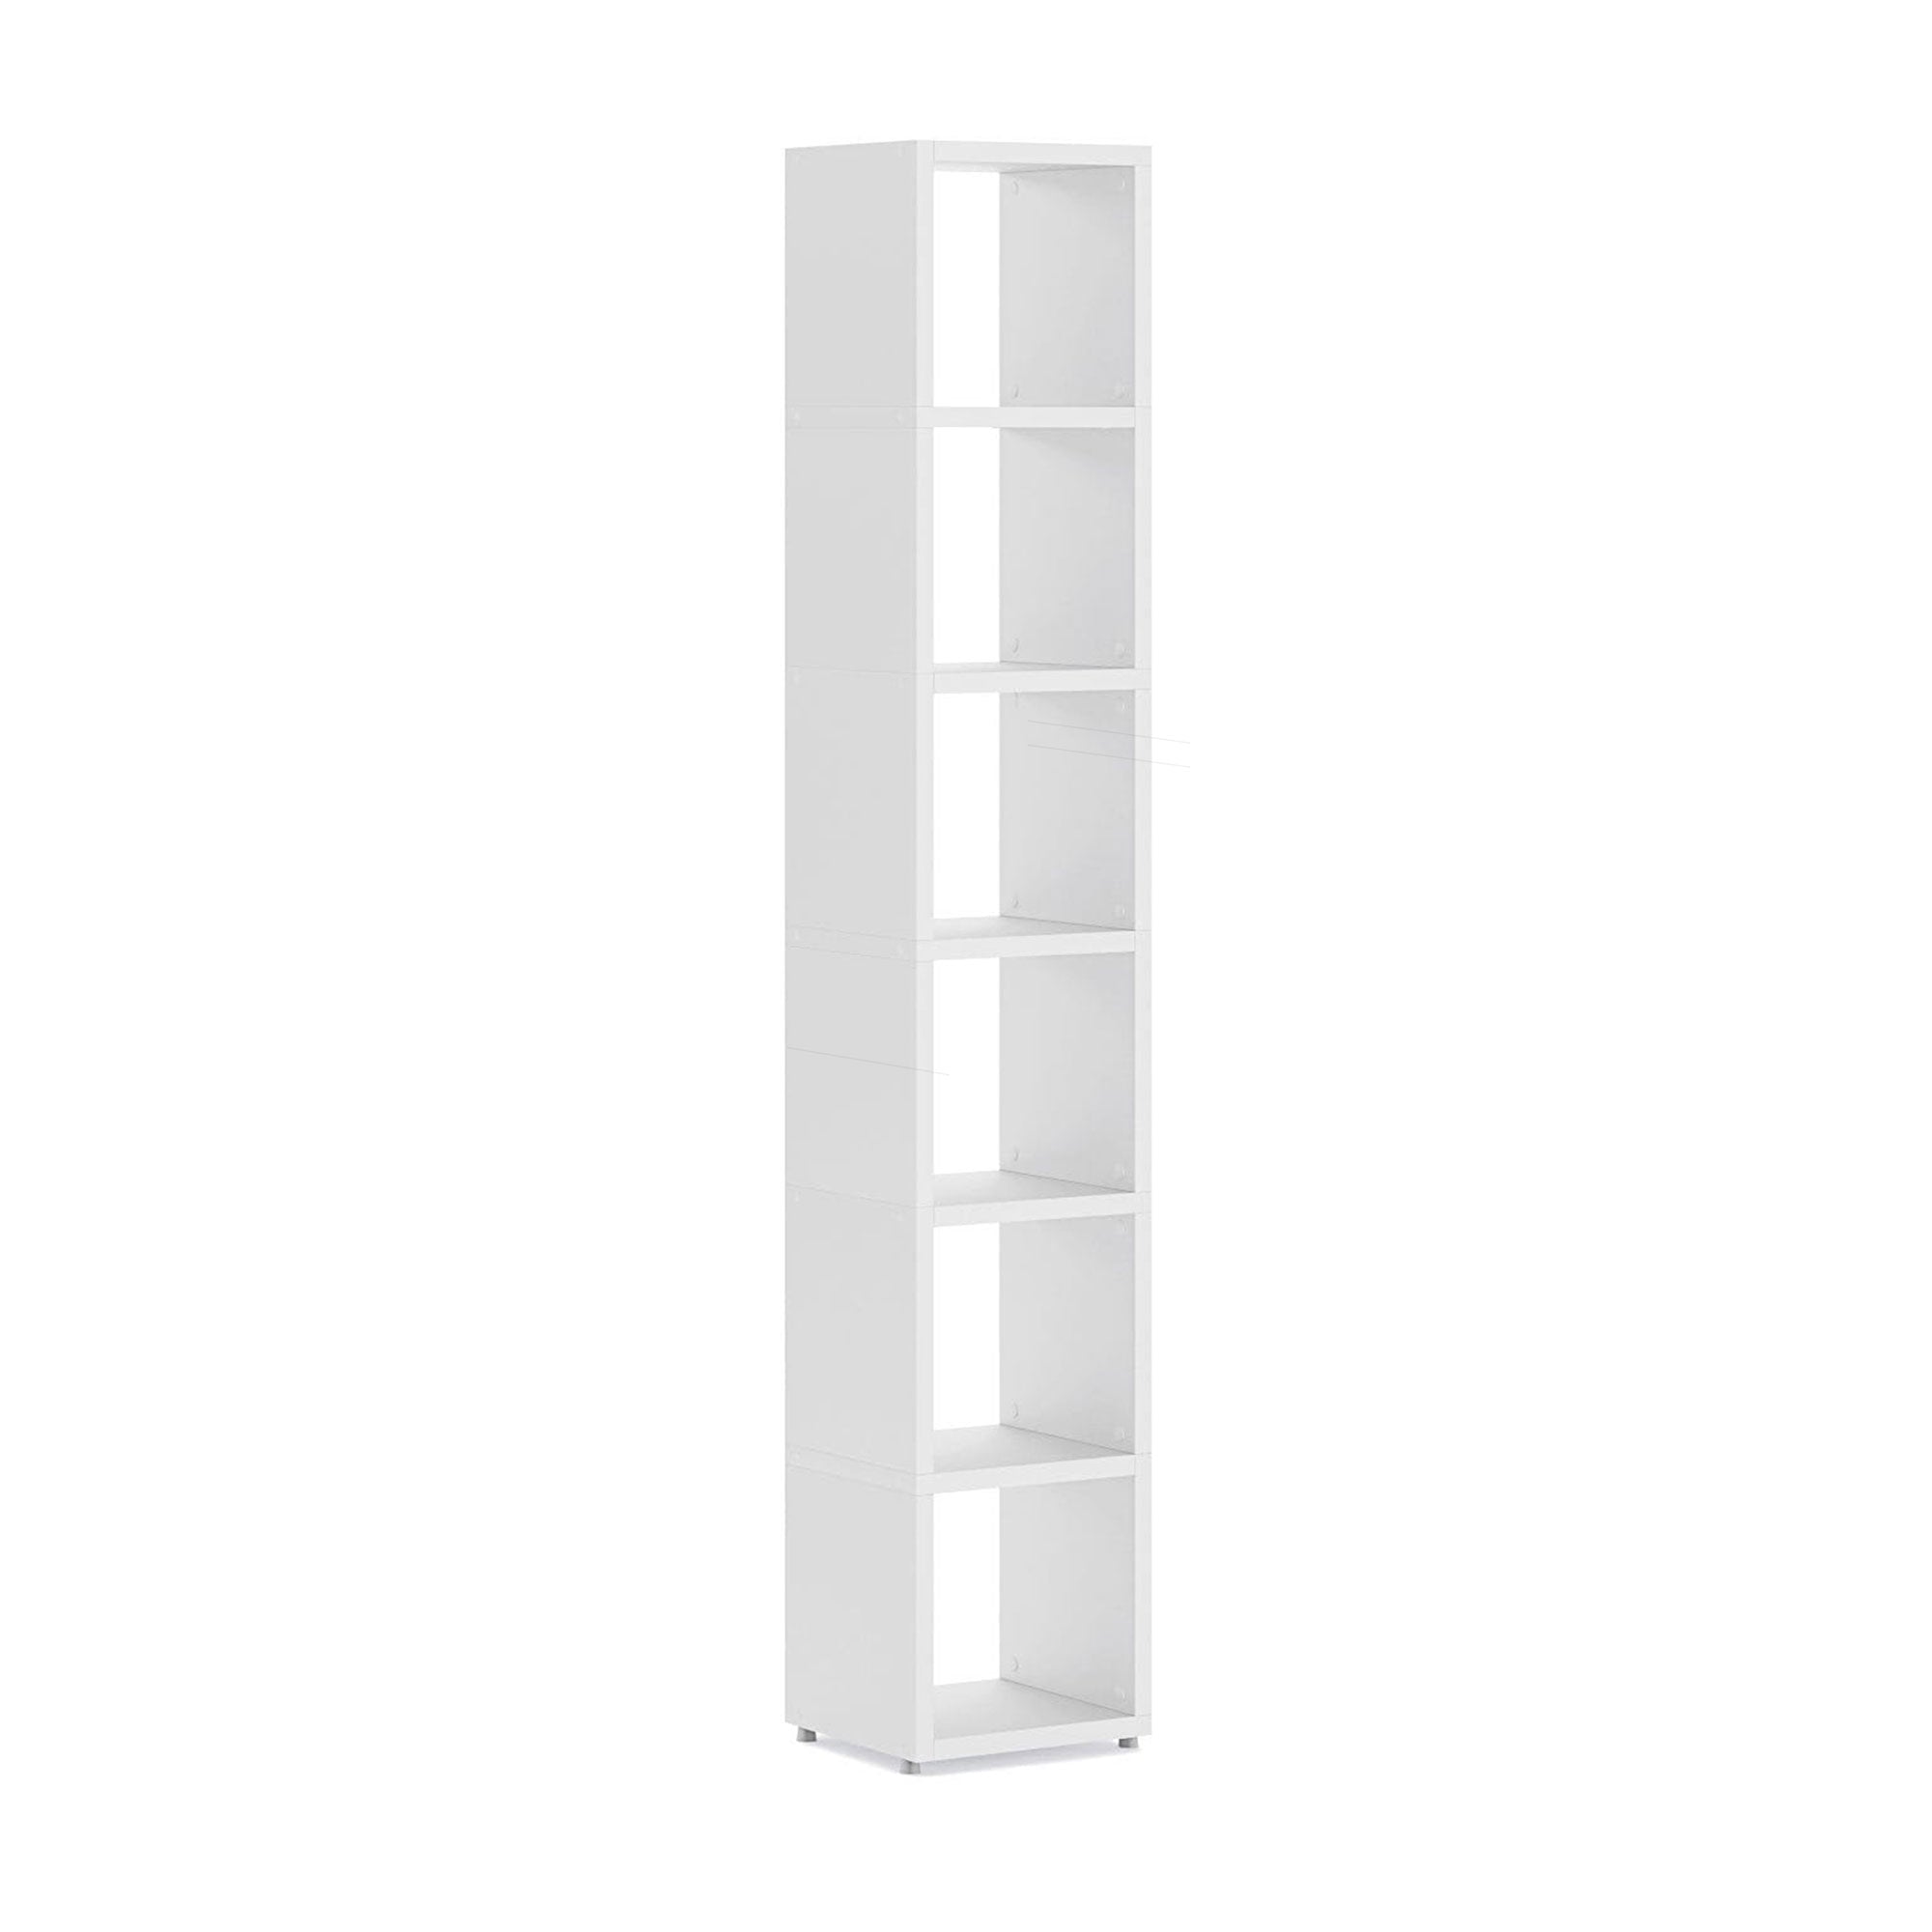 Boon 6x Cube Shelf Storage System - 2180x380x330mm - Office Products Online